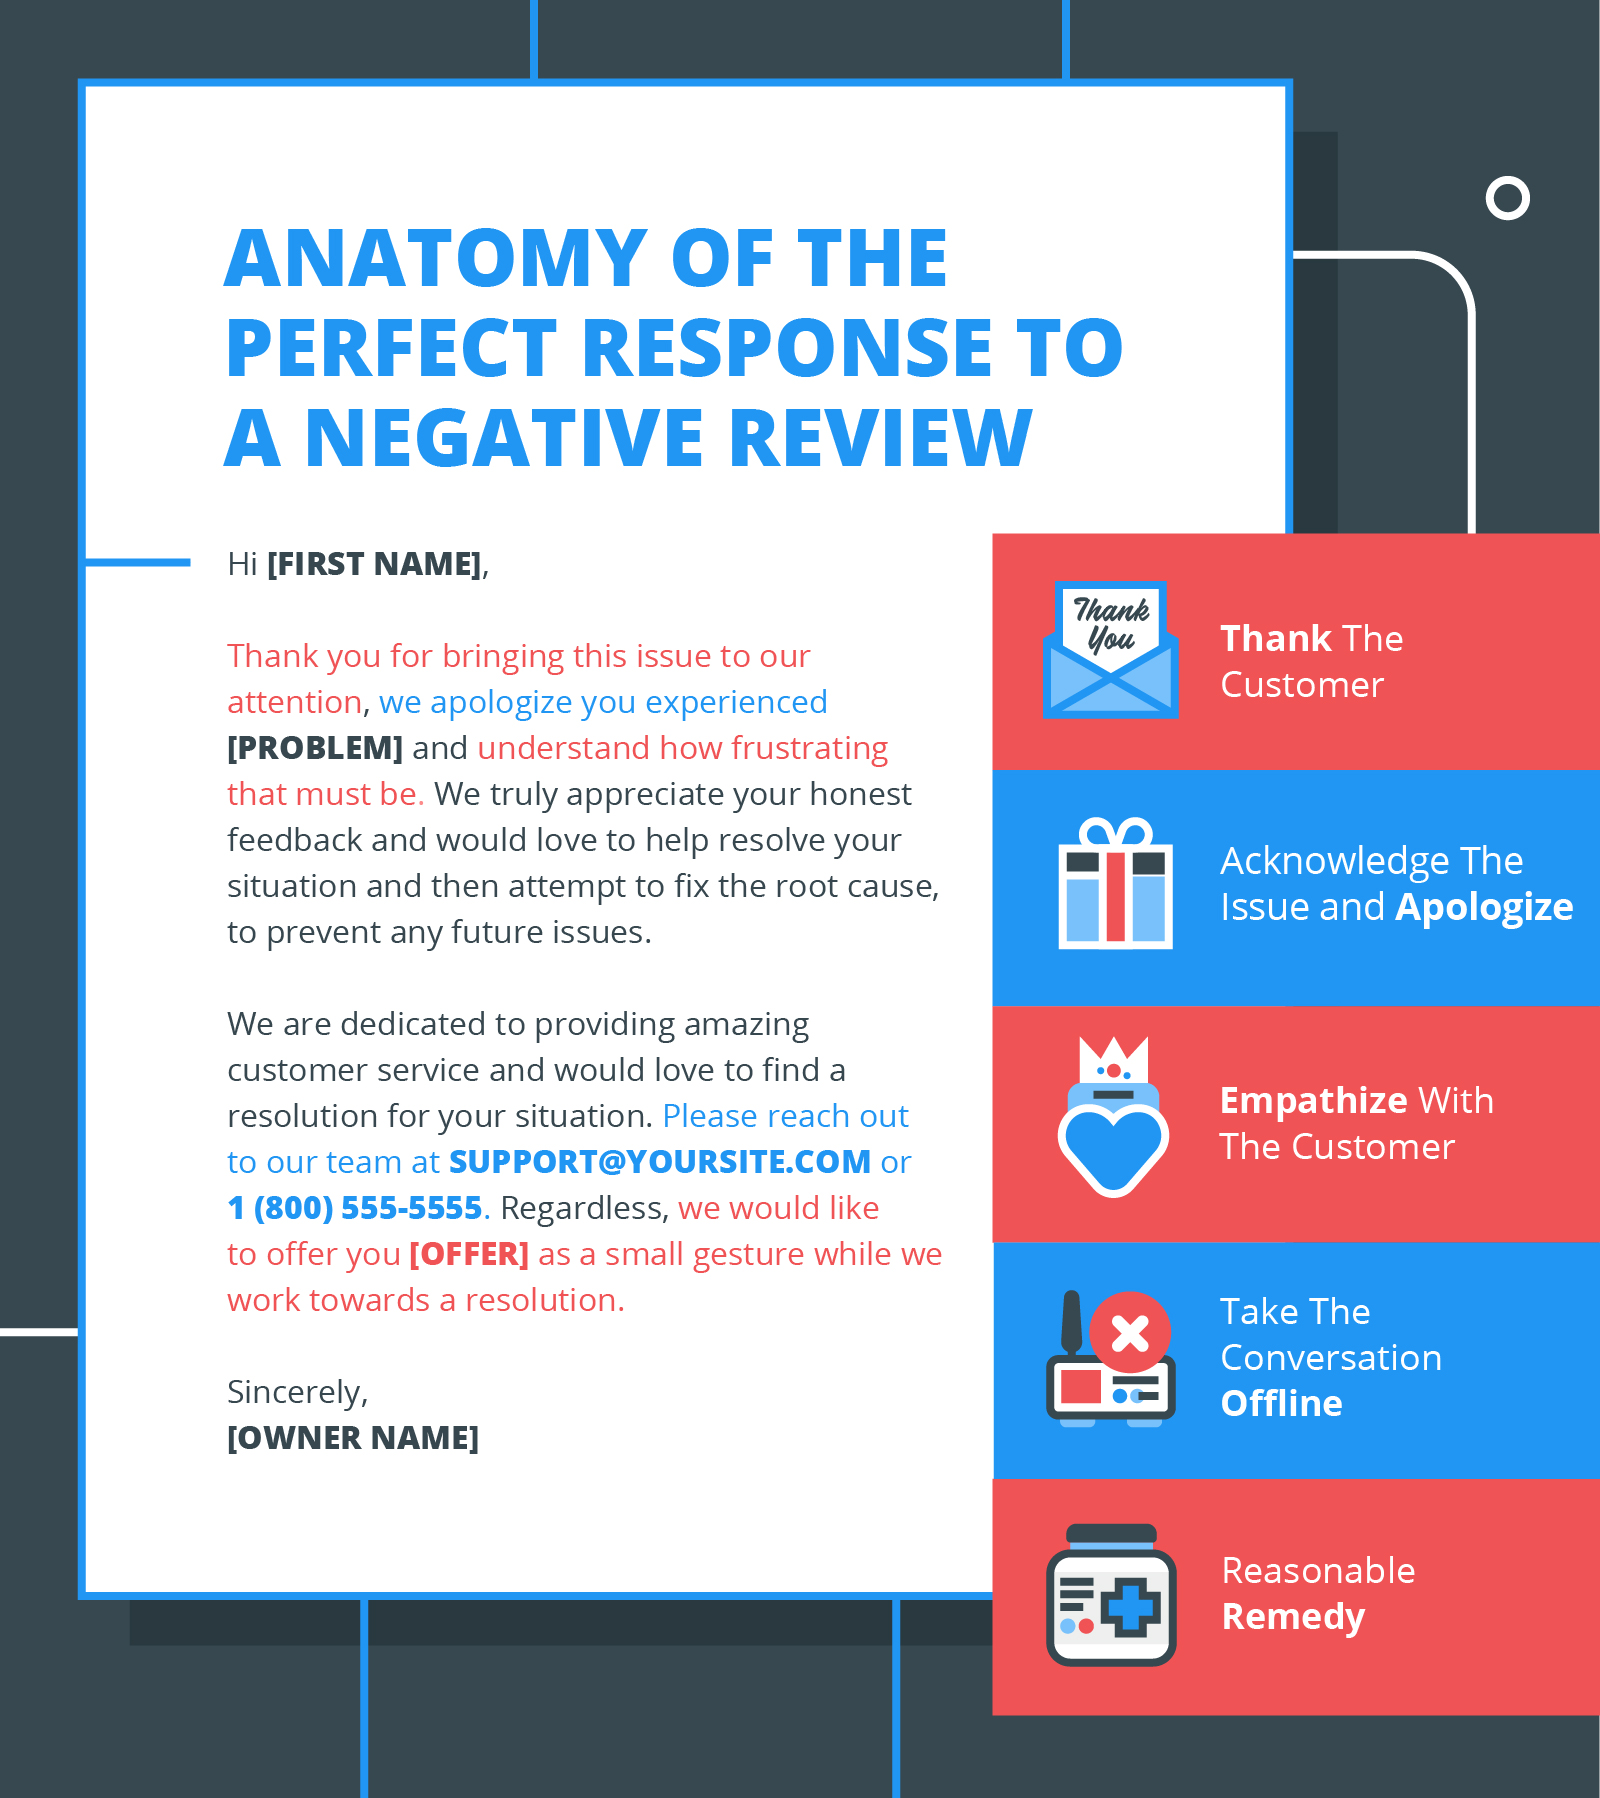 Template for responding to negative reviews highlighting tips.